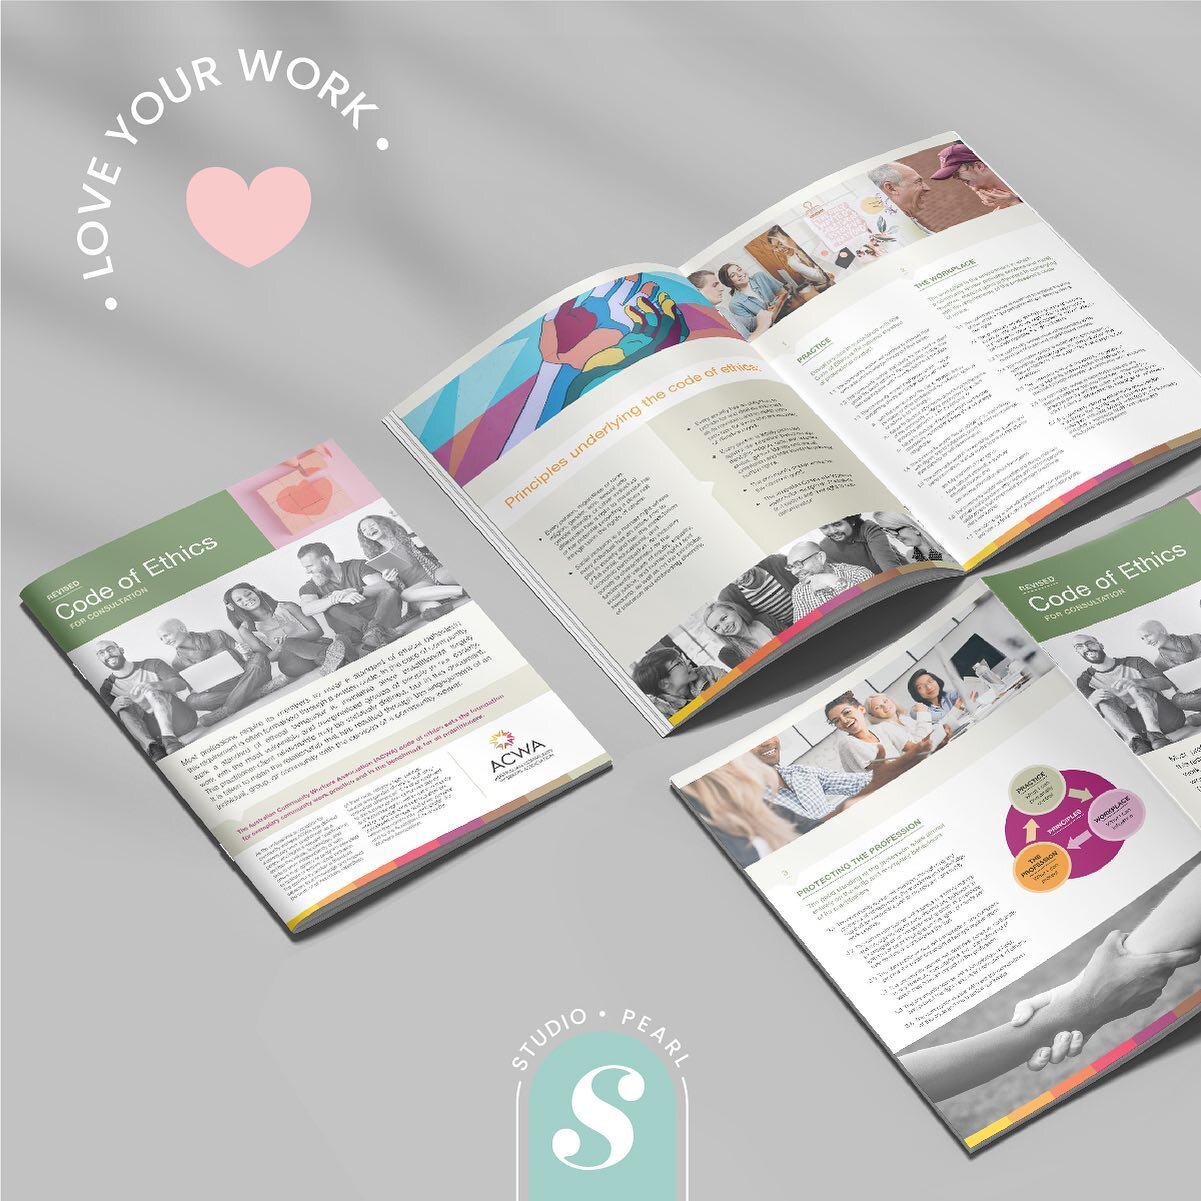 I get so excited to see my design babies out in the world! I had the pleasure of working with the Australian Community Workers Association to redesign their Code of Ethics brochure. 

From sourcing beautiful engaging images, to creating infographics 